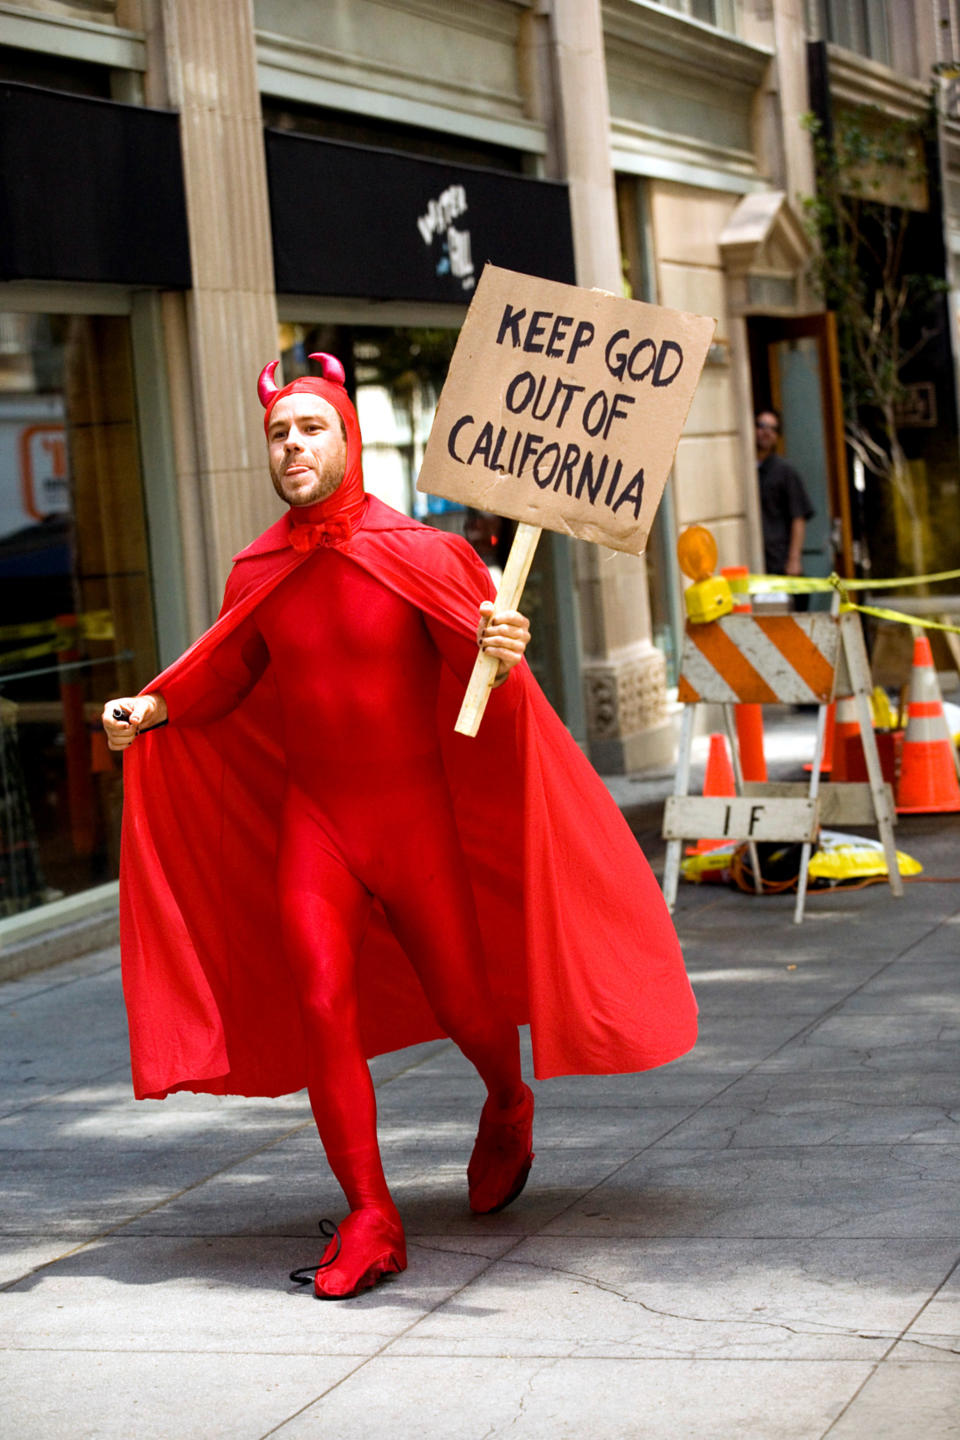 Chris, dressed as a devil and holding a protest sign that reads "Keep God Out of California"